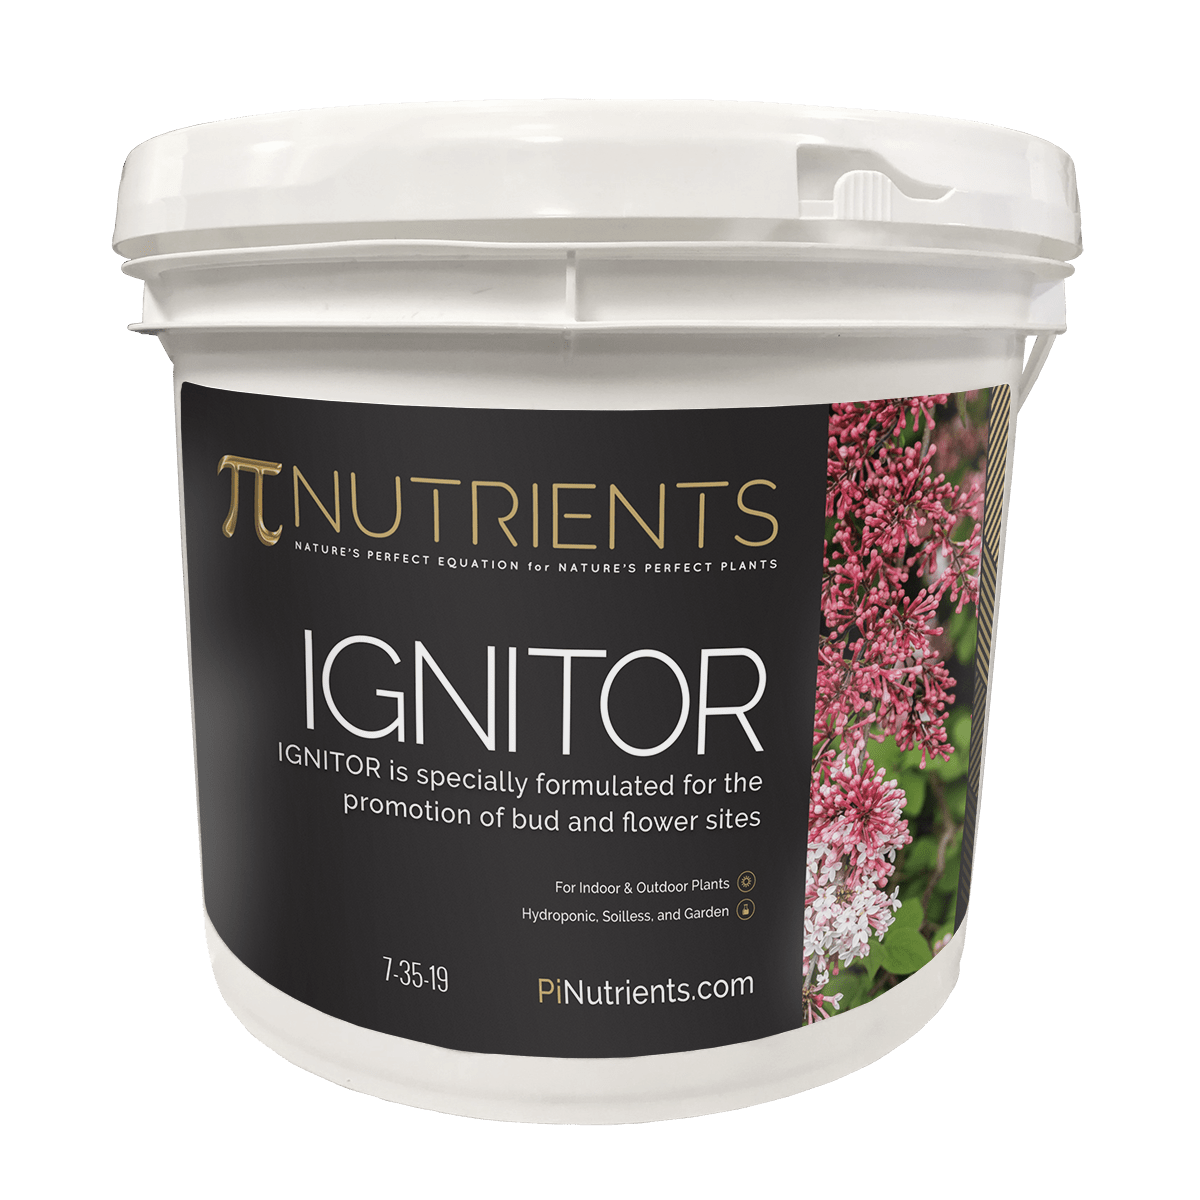 Pi Nutrients - Ignitor 7-35-19 | Fearless Gardener Brand